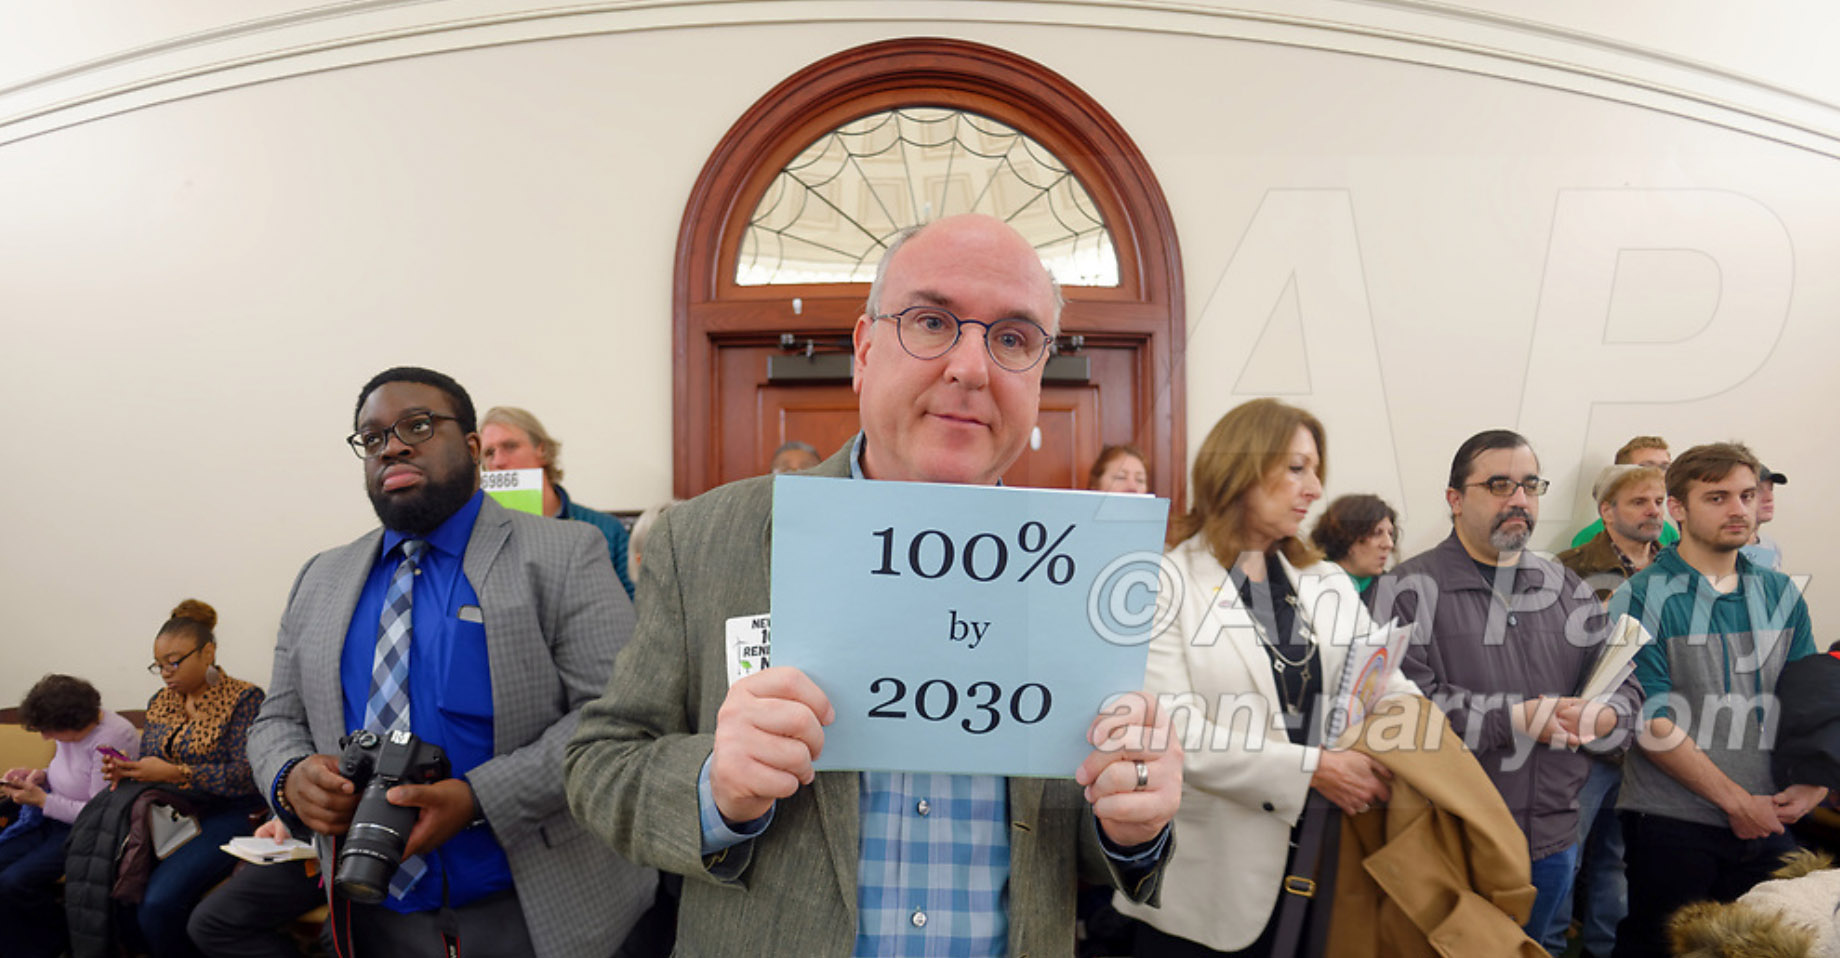 Mineola, New York, USA. 15th Feb, 2019. ERIC WELTMAN, Brooklyn, a Senior Organizer for Food & Water Watch in New York, is holding a blue card with 100% by 2030 on it, referring to goal of 100% clean energy by 2030, during NYS Senate Public Hearing on Climate, Community & Protection Act, Bill S7253, sponsored by Sen. Kaminsky, Chair of Senate Standing Committee on Environmental Conservation. This 3rd public hearing on bill to fight climate change was on Long Island.